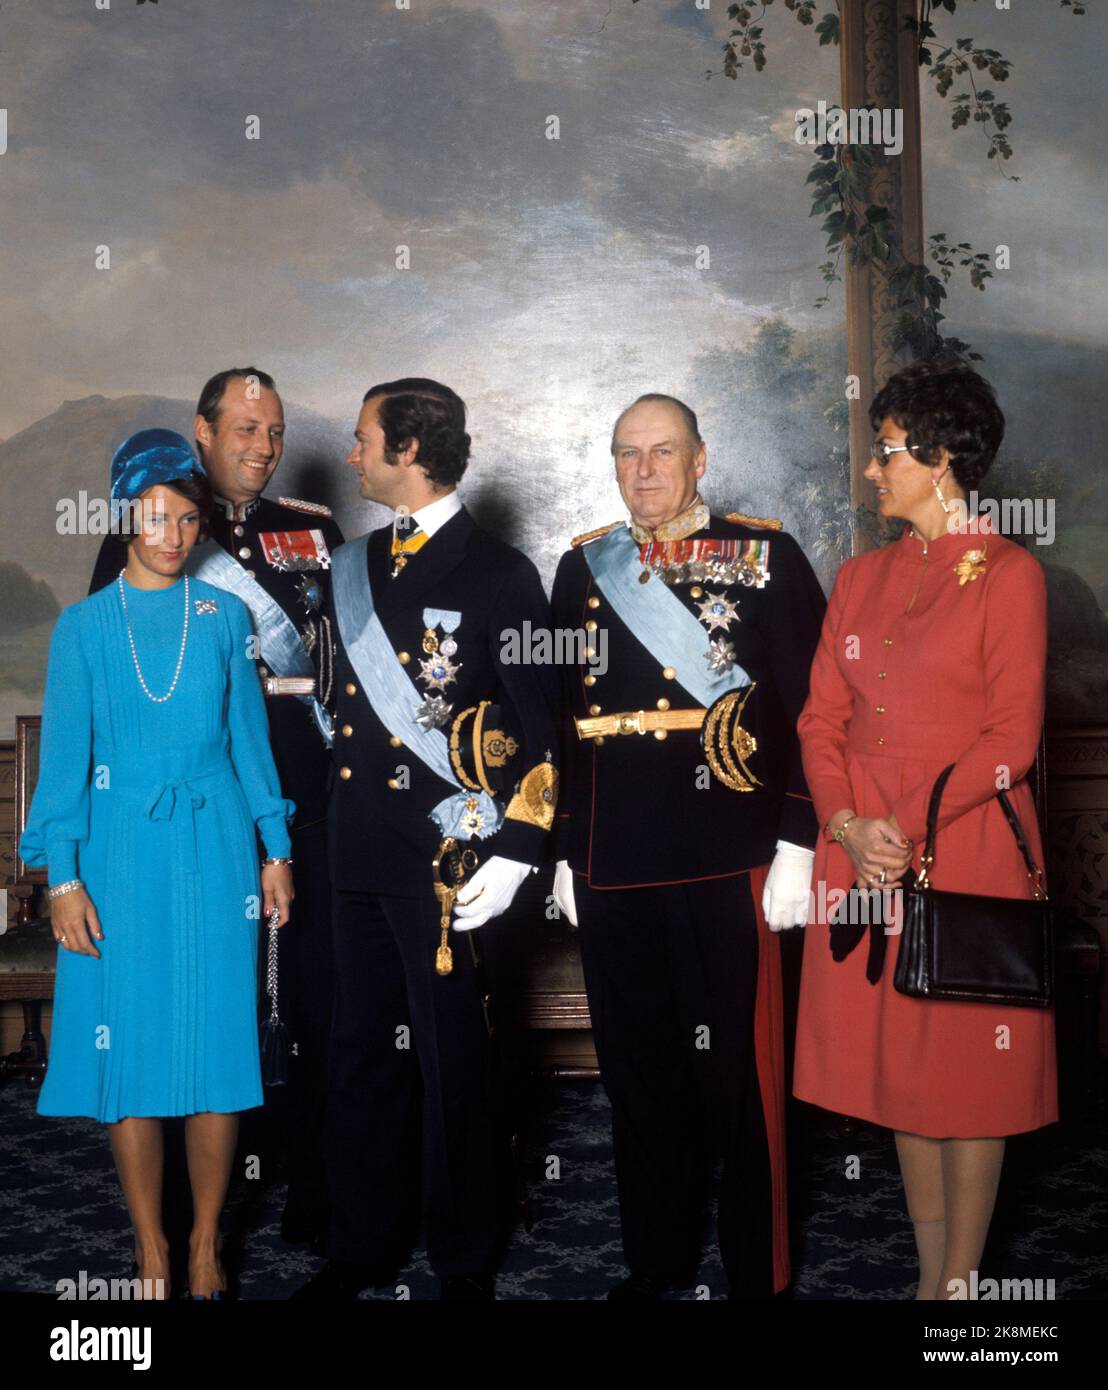 Oslo October 1974: King Carl Gustaf of Sweden on an official visit to Norway. Here together with King Olav photographed in the birdworks at the castle. Eg. Crown Princess Sonja in blue dress with hat, Crown Prince Harald, King Carl Gustaf of Sweden, King Olav and Princess Astrid. Photo: NTB / NTB Stock Photo